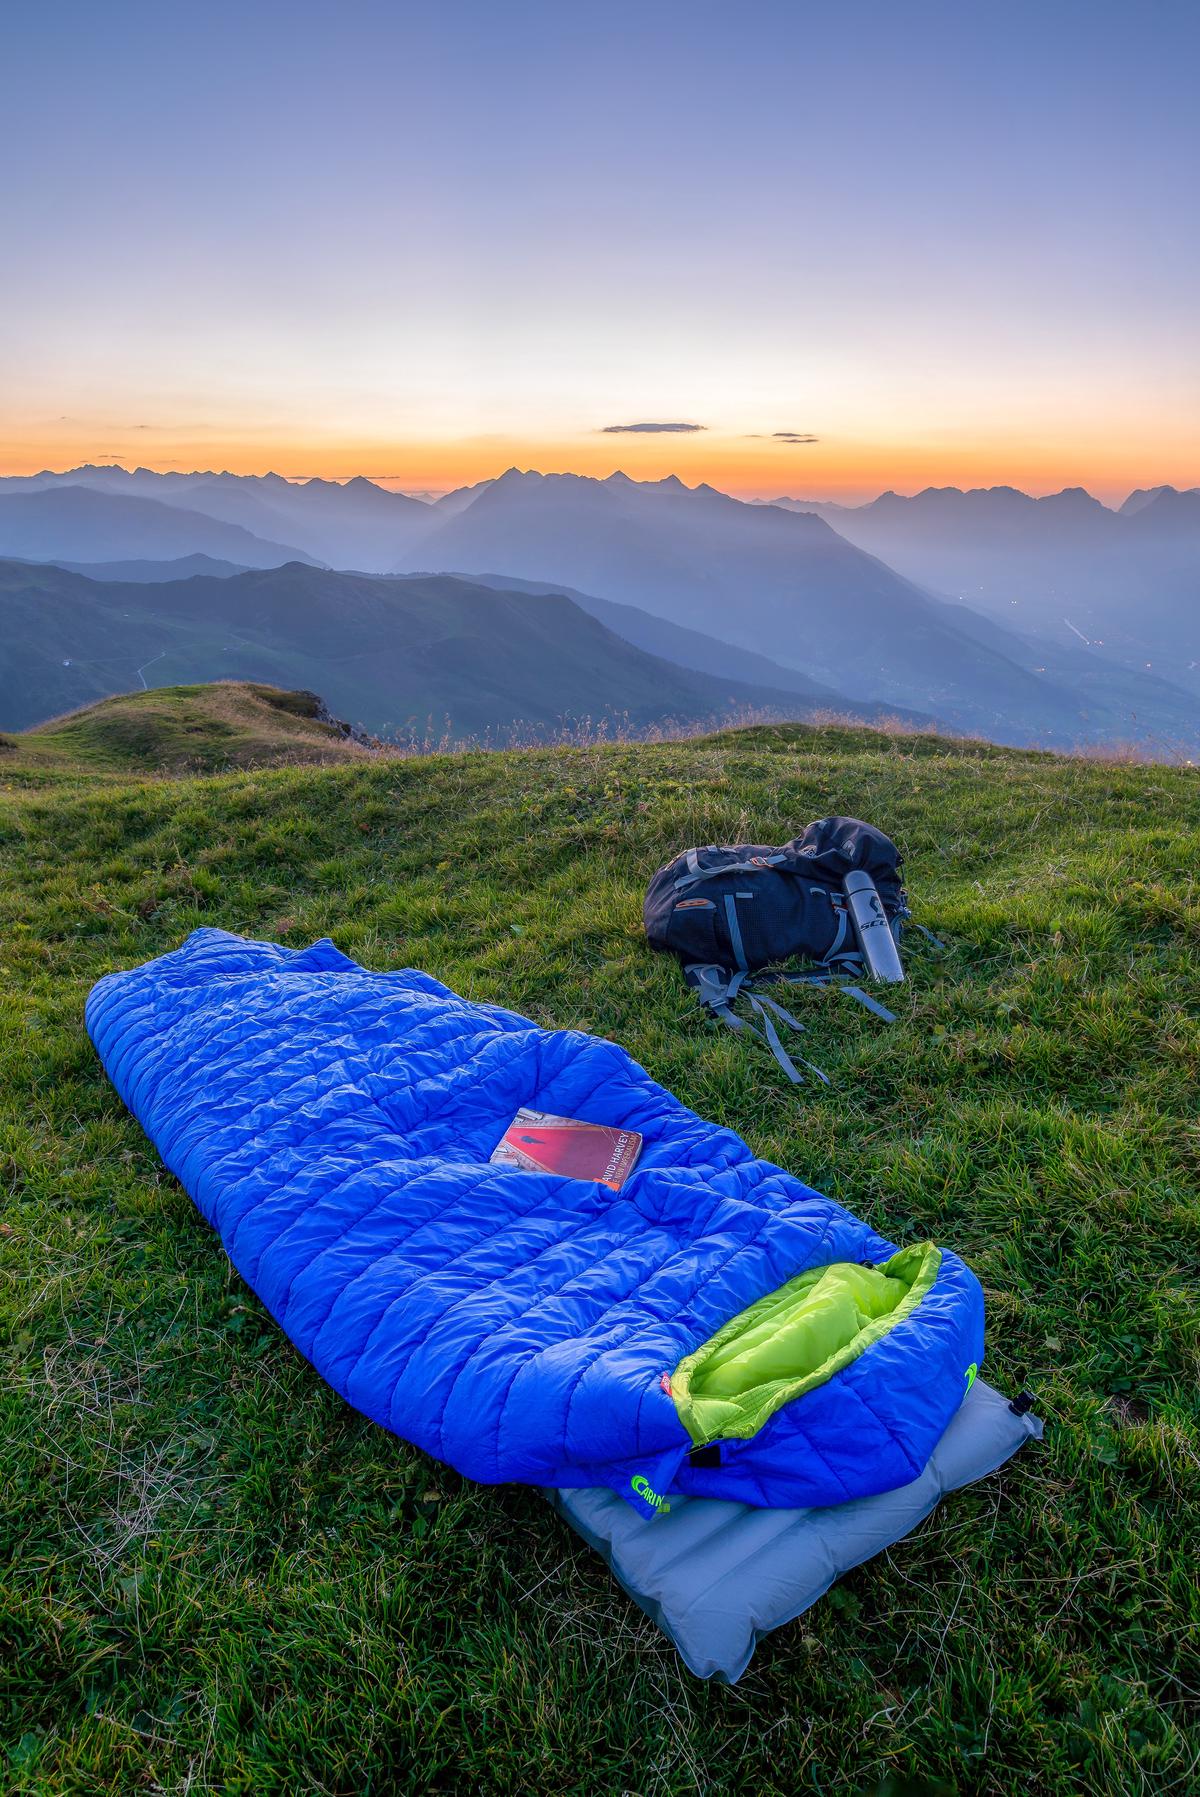 Image of a neatly folded sleeping bag with a serene camping scene in the background